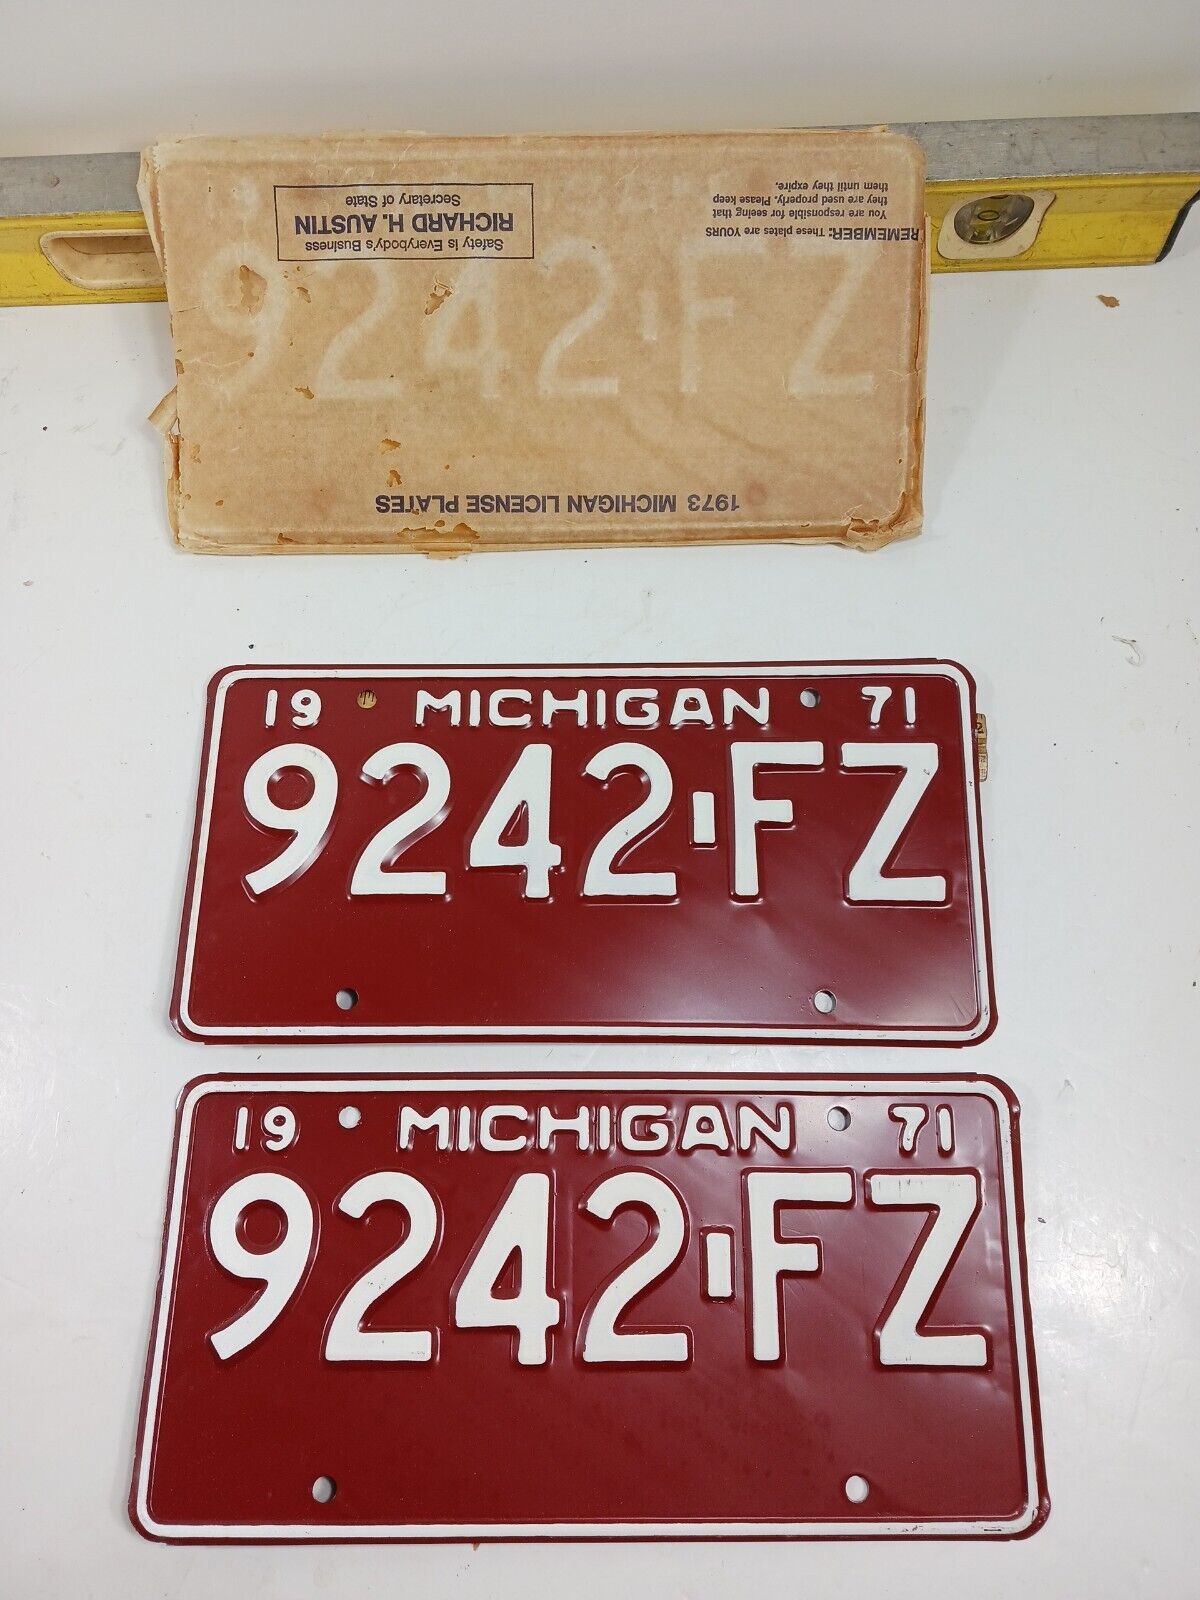 Vintage Unused NOS Michigan 1971 License Plate, Beauty Commercial Mint  9242-FZ